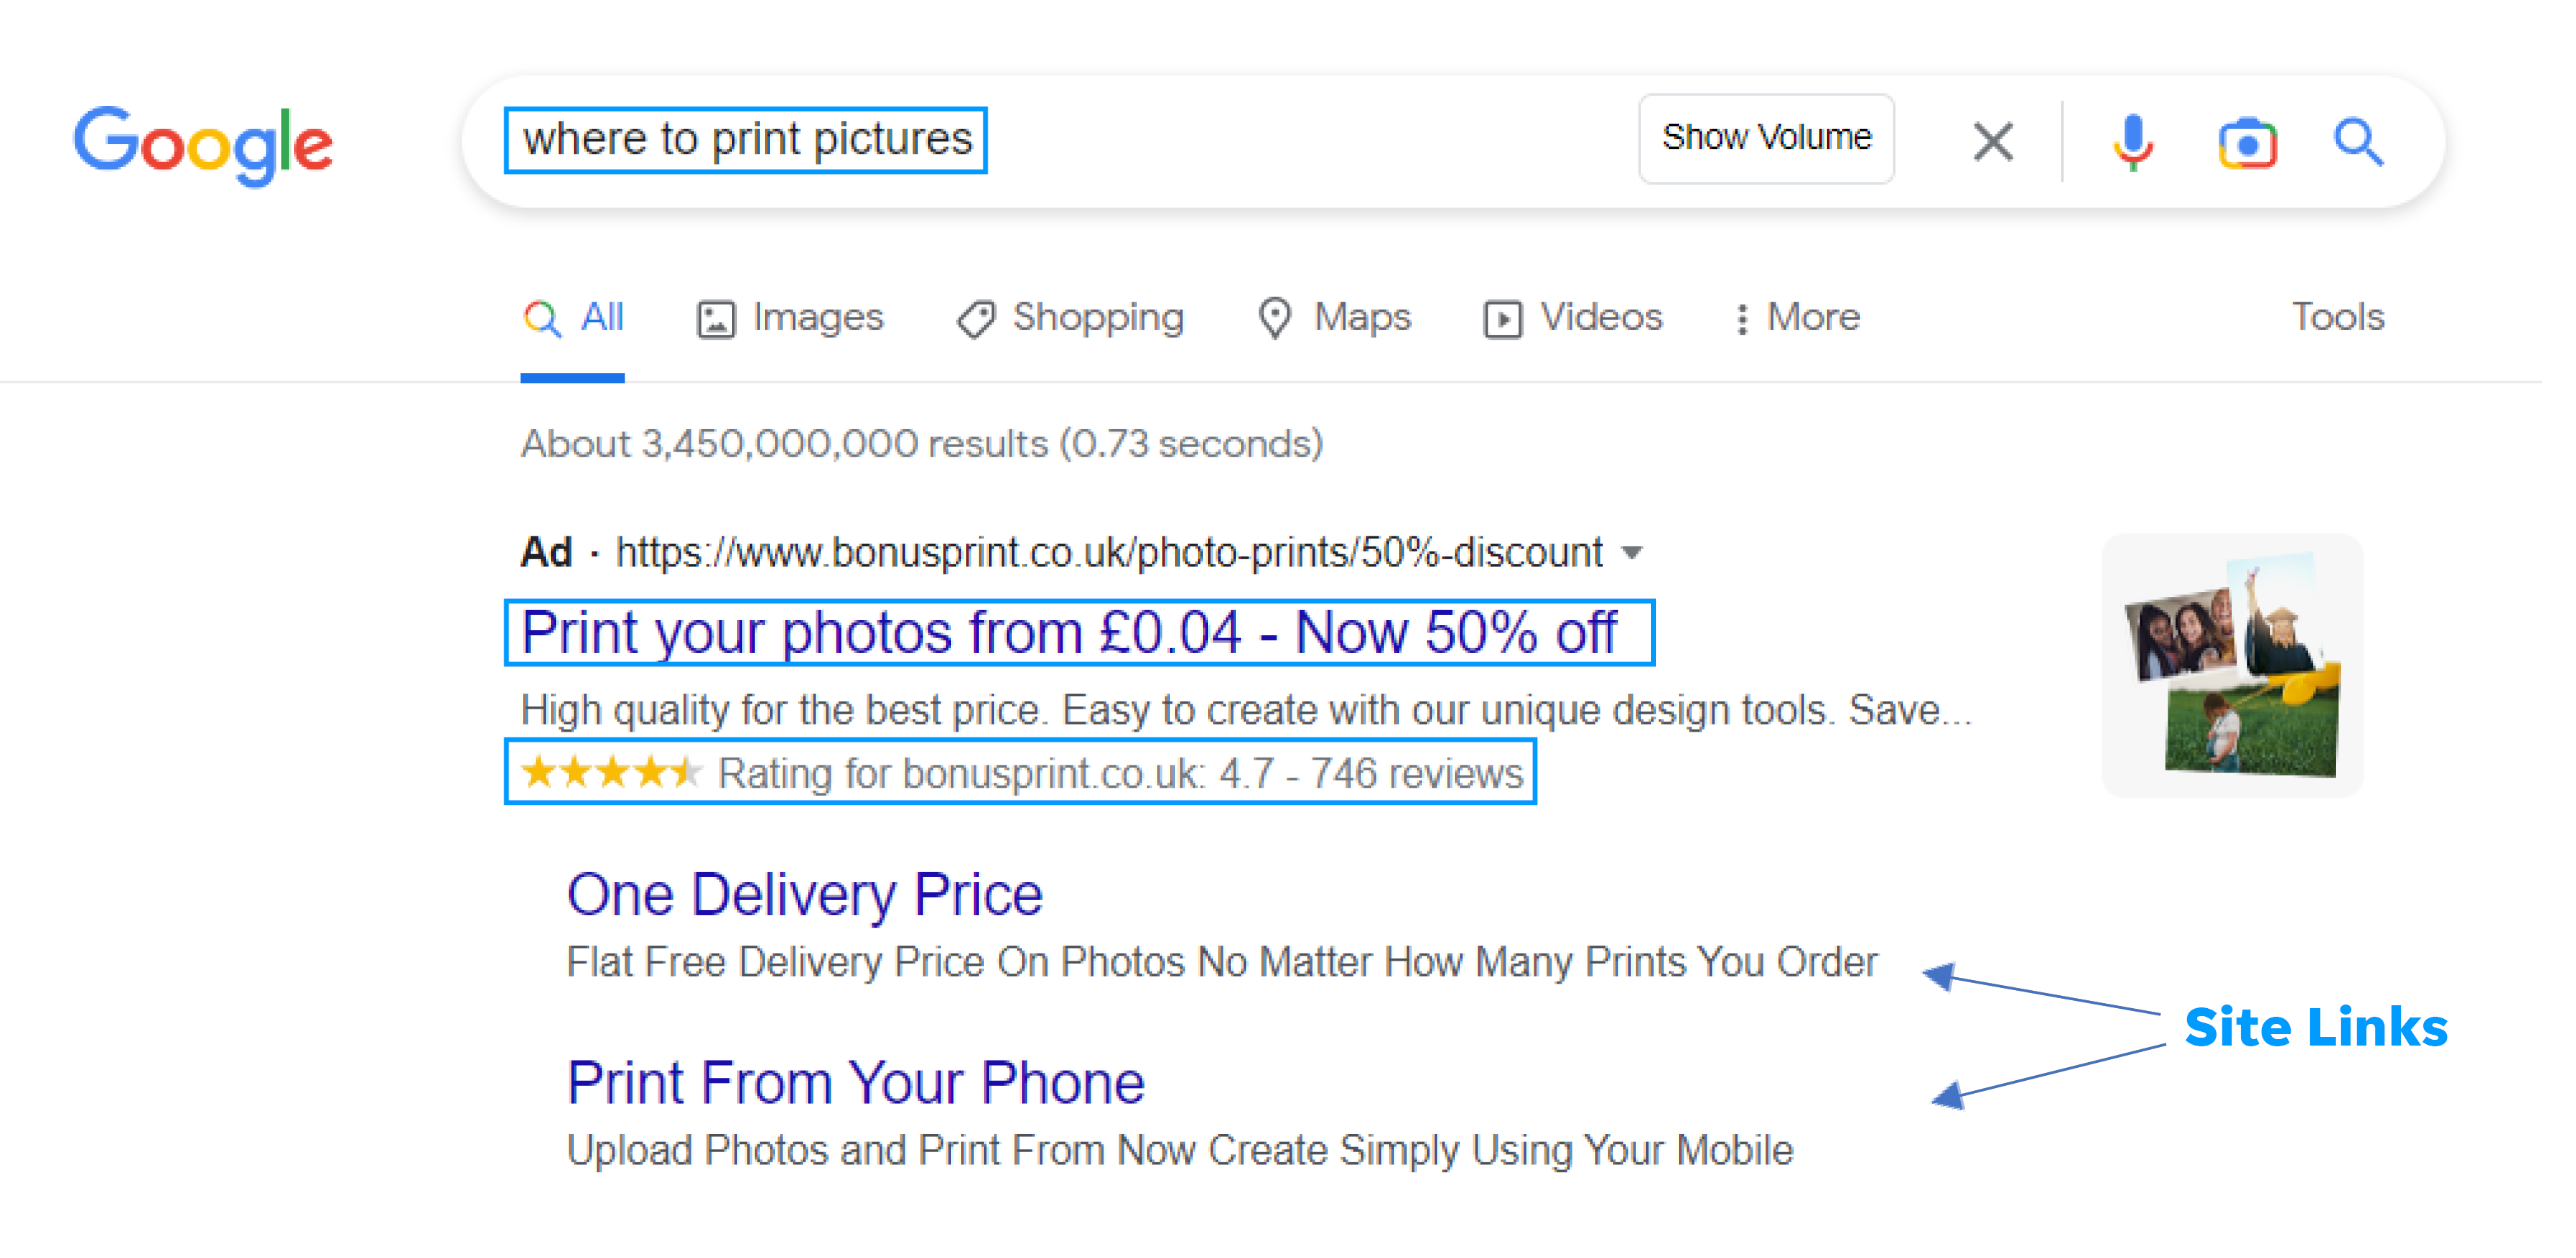 Screenshot of Bonus print paid search ad on Google search results page